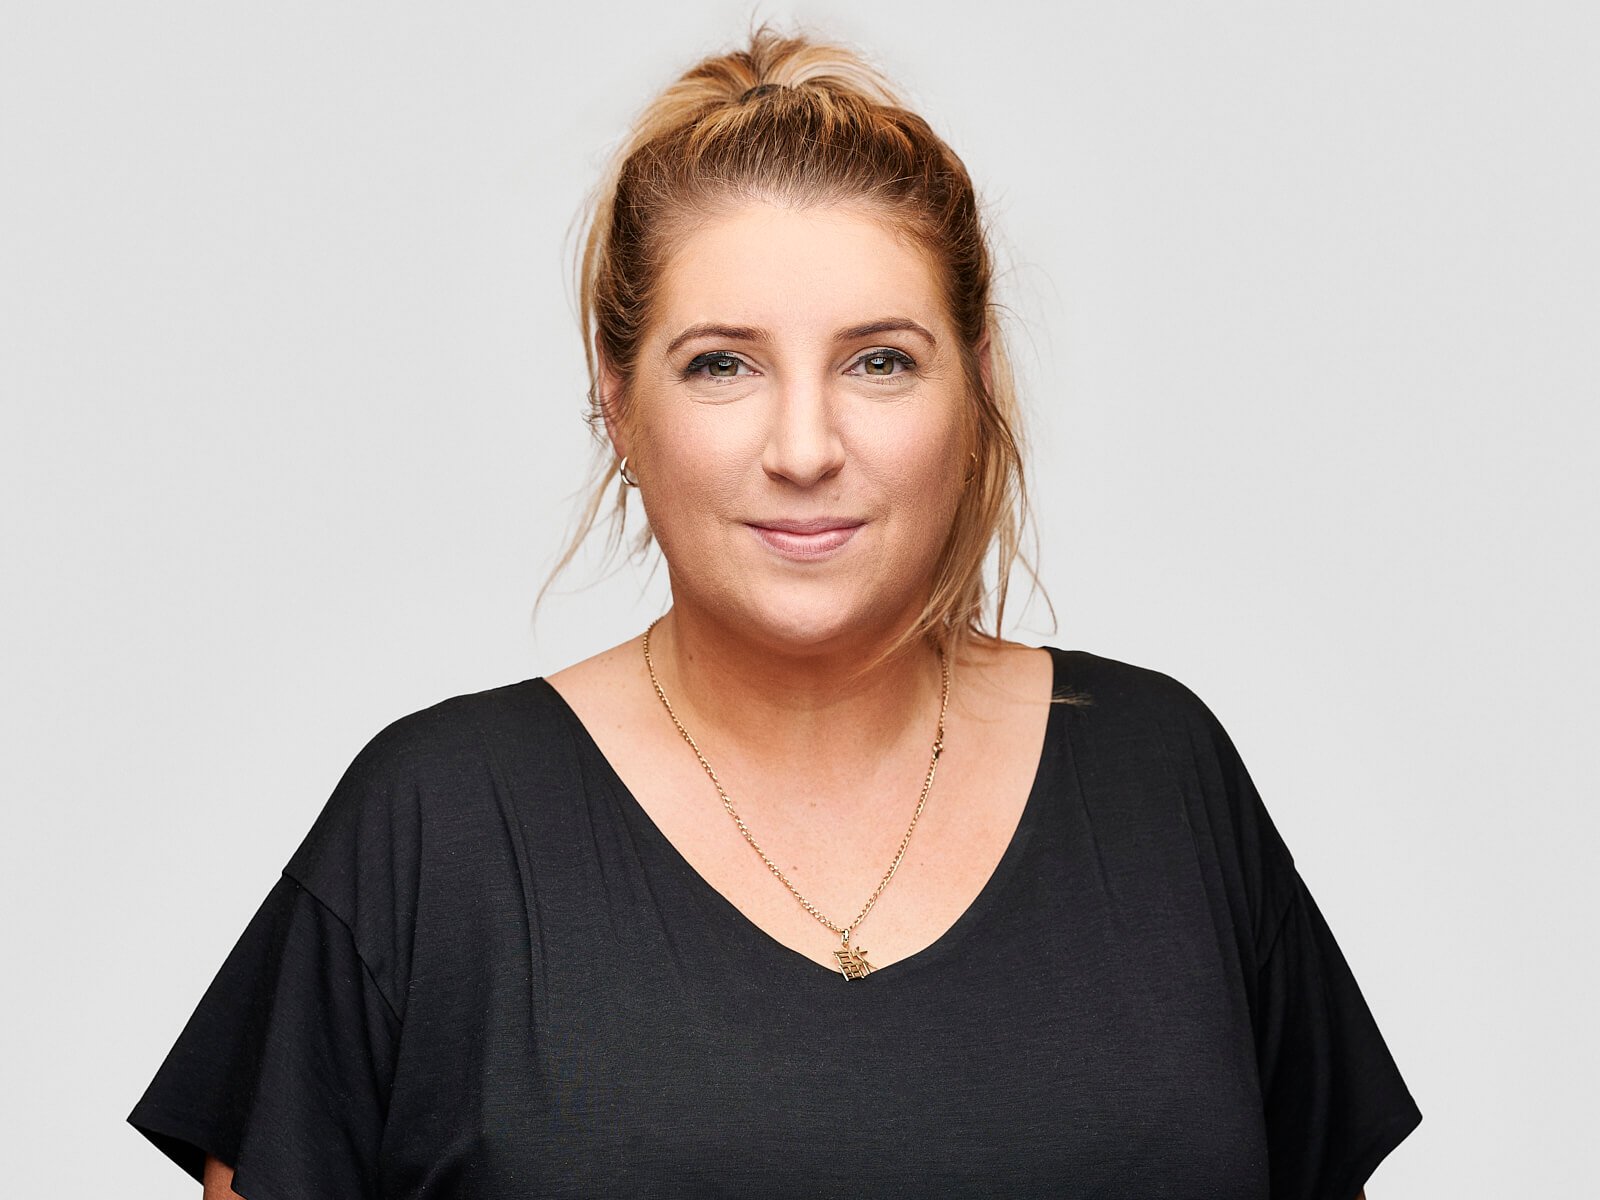 Business team headshot of smiling woman with tied back hair wearing a black t-shirt against a white background